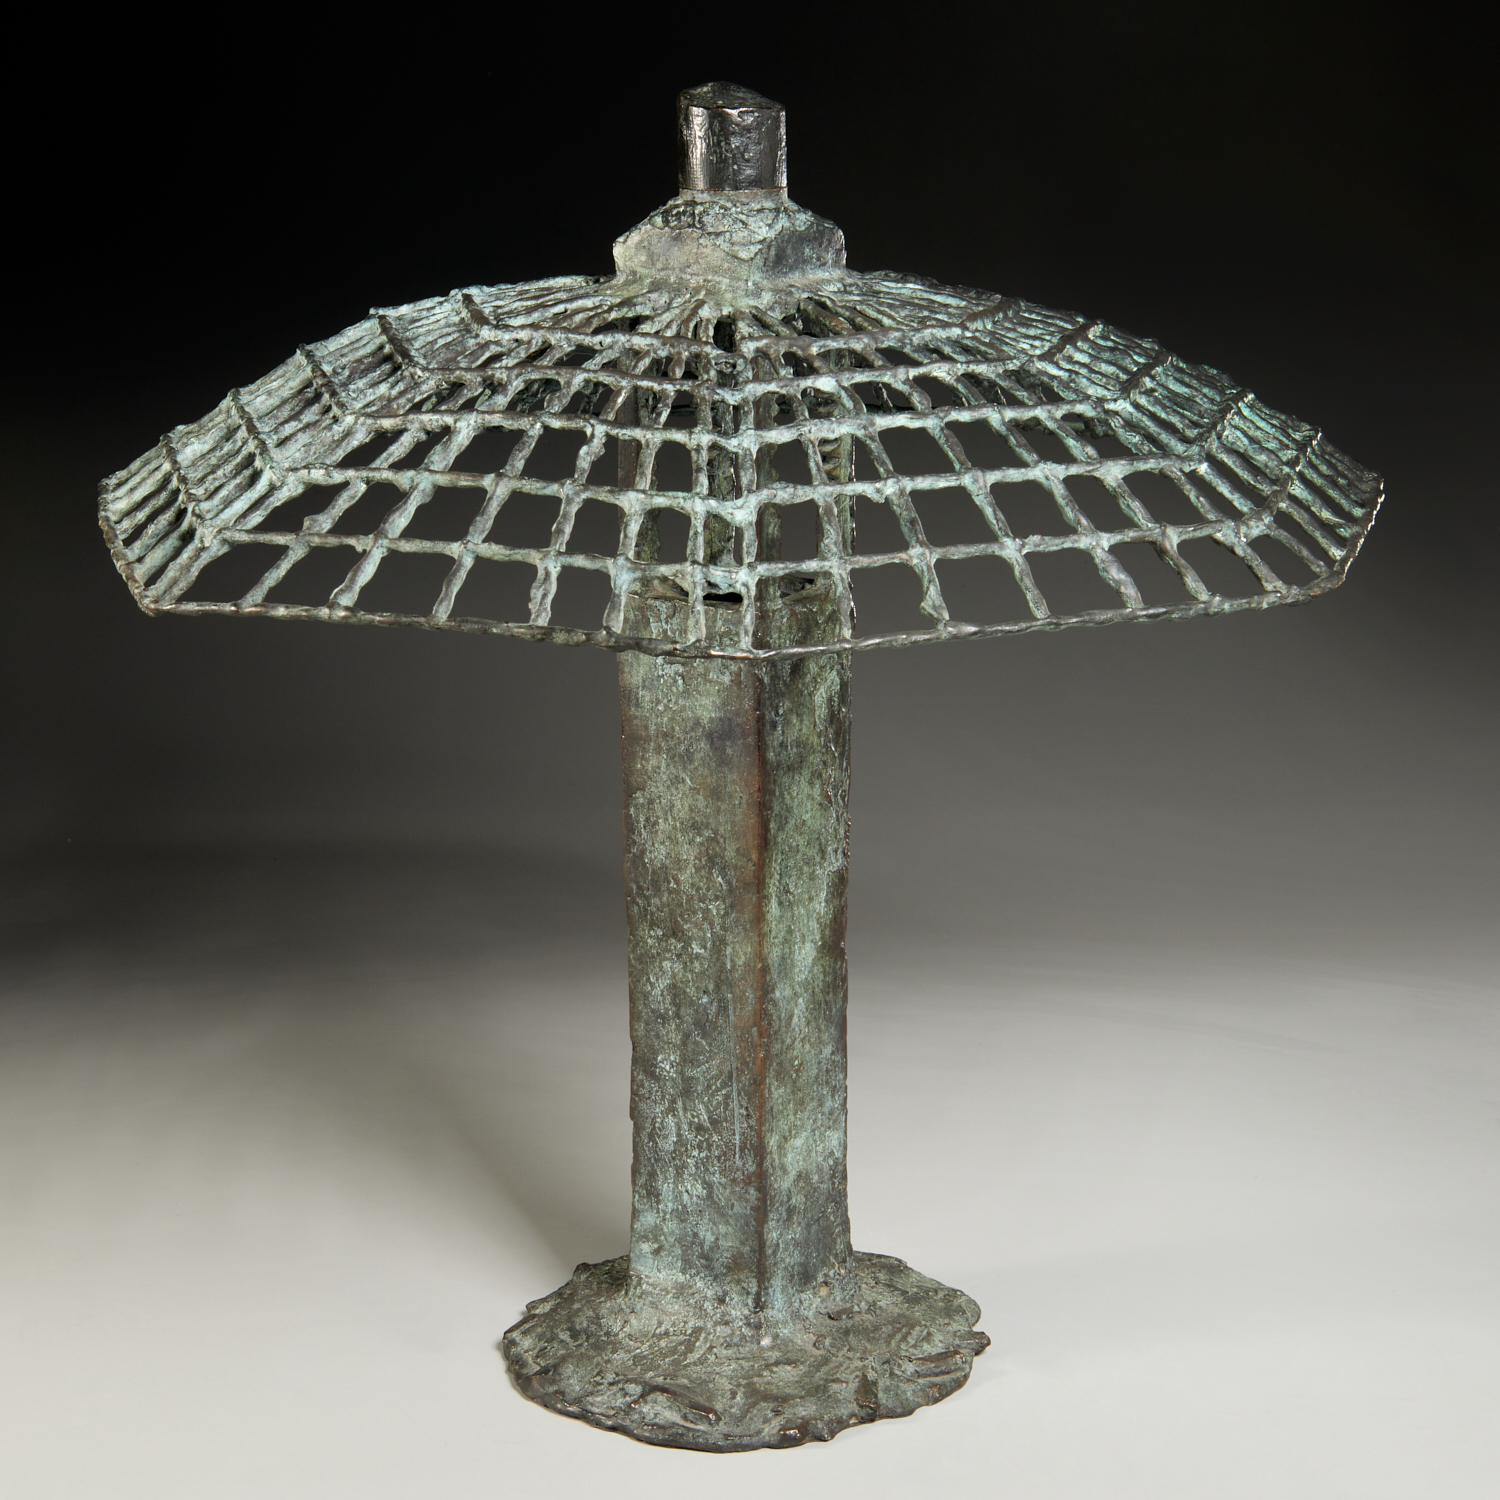 LOUIS CANE PATINATED BRONZE TABLE 2bf90c